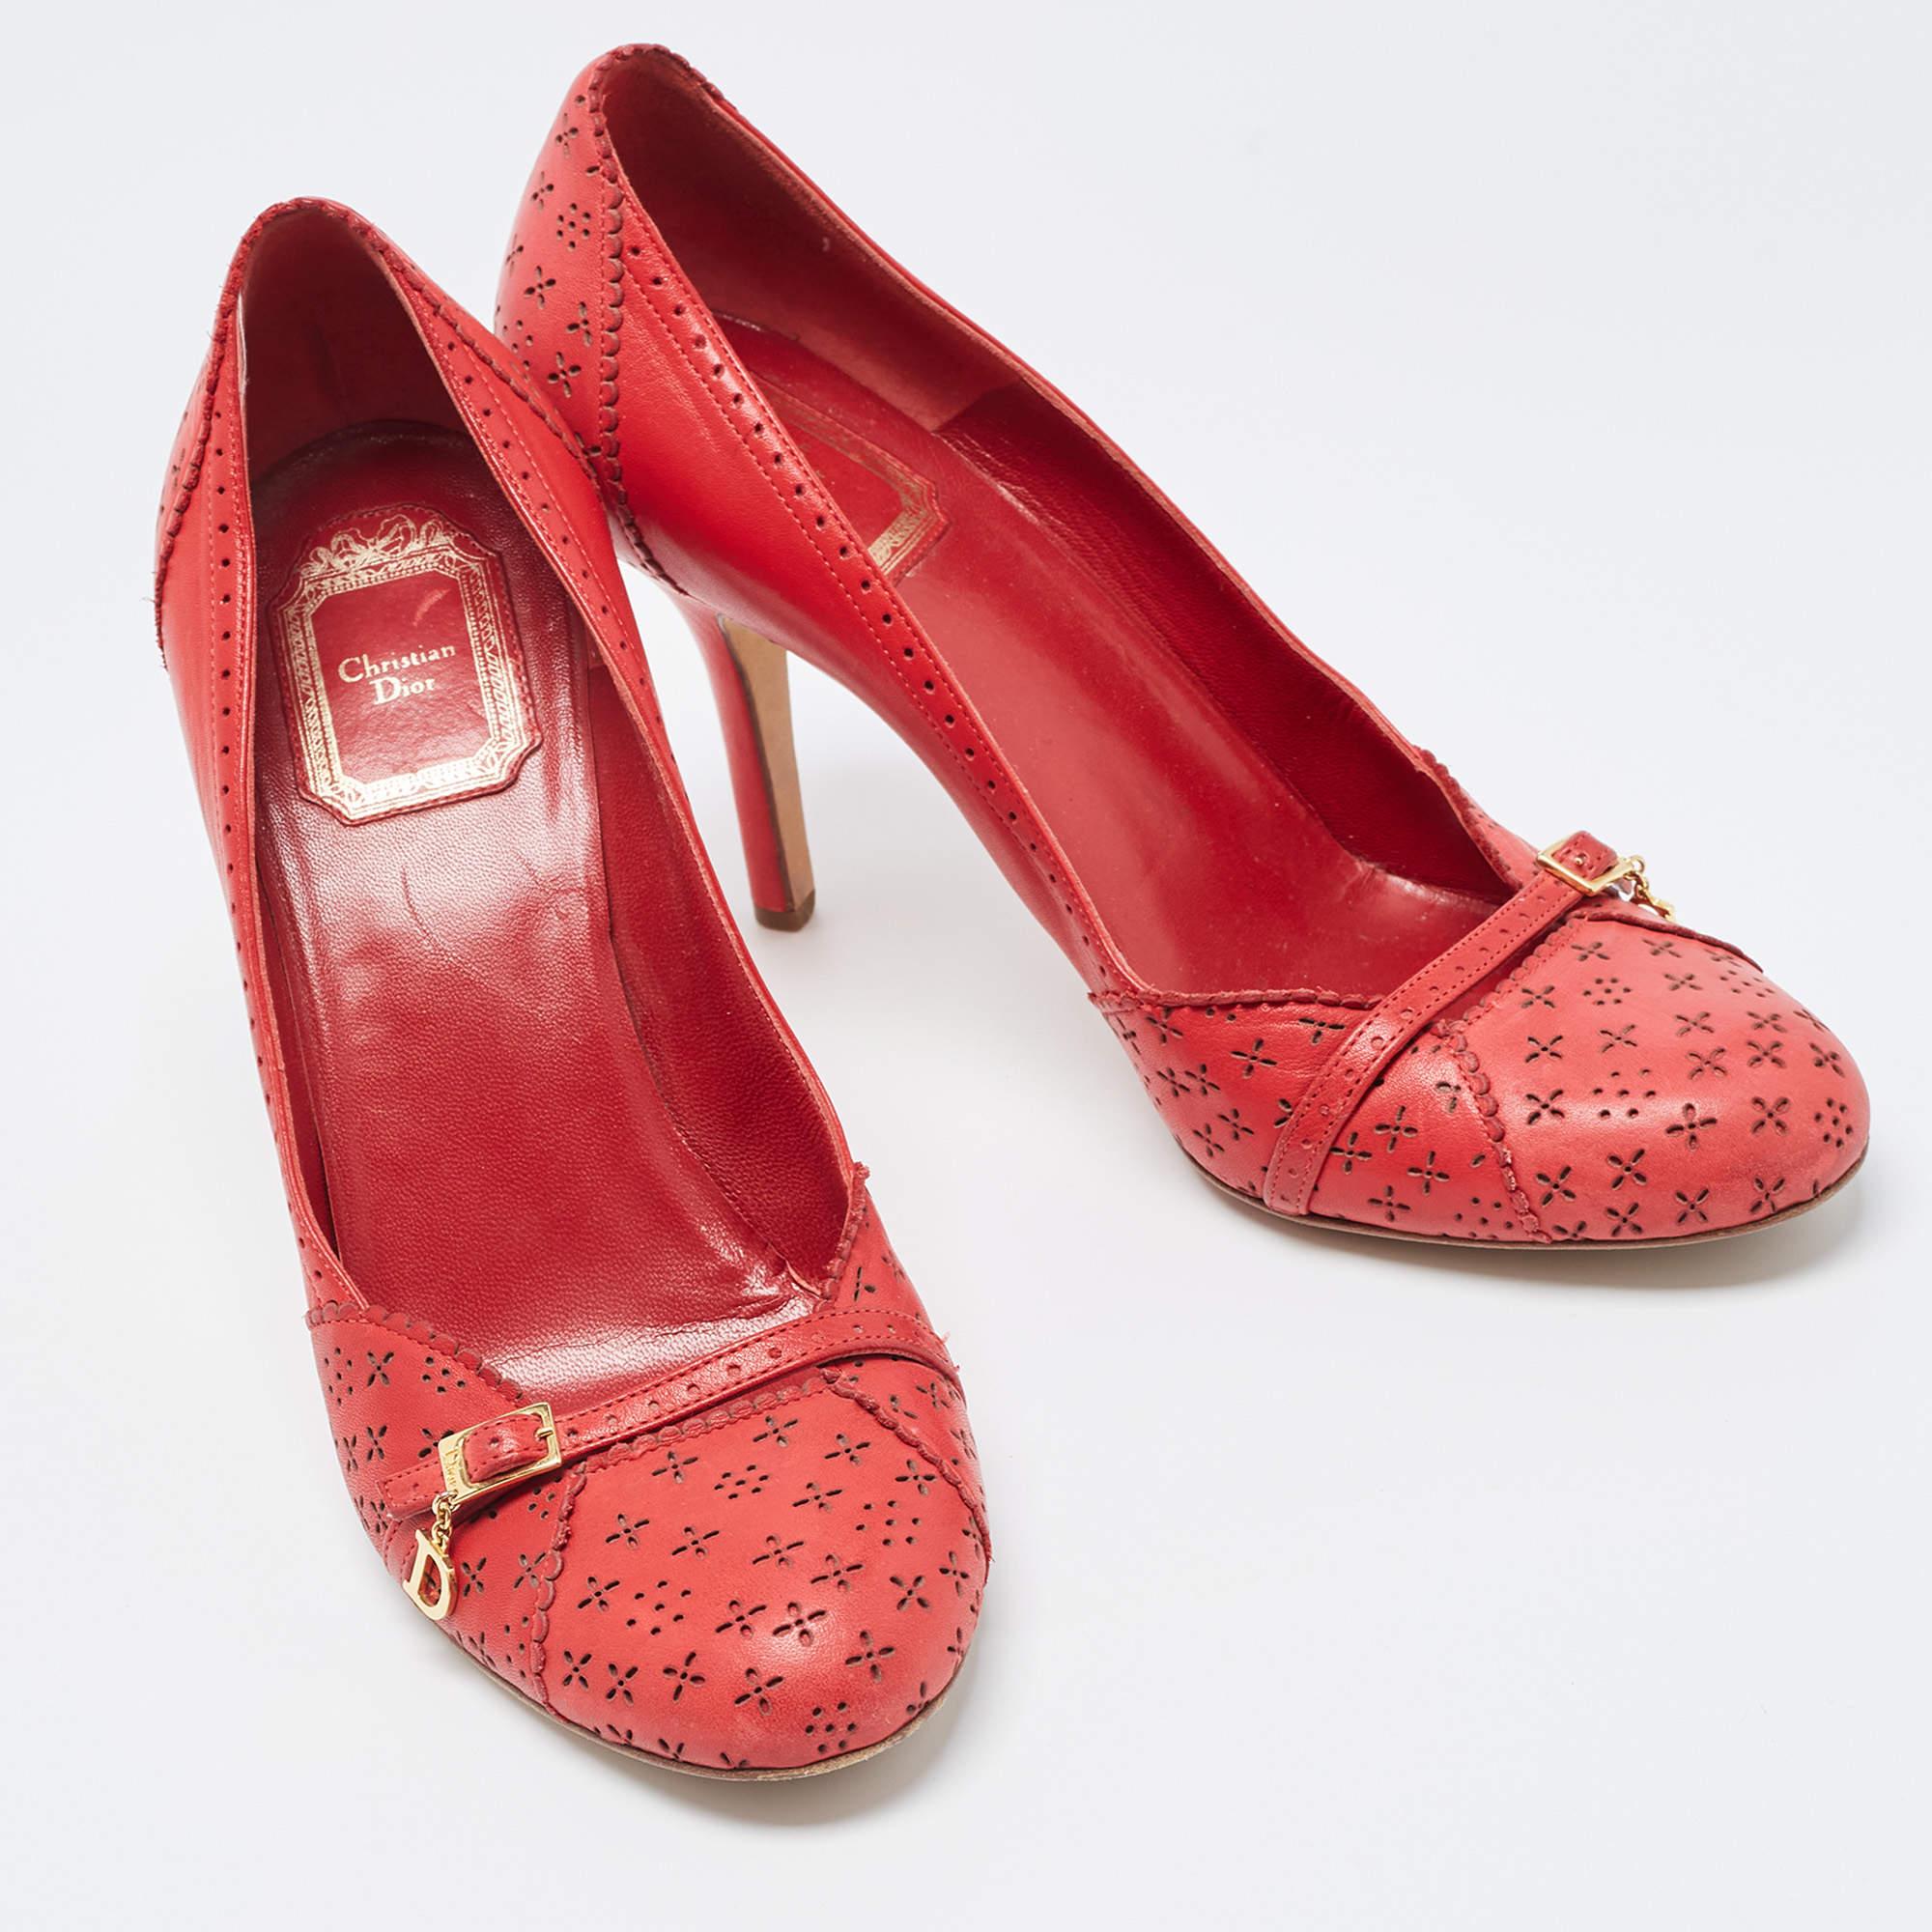 Look chic and make an elegant style statement in this pair of pumps from the leading luxury house of Dior. They are crafted from leather featuring round toes, high heels, an understated shade of red, and a lovely finish. Add a touch of